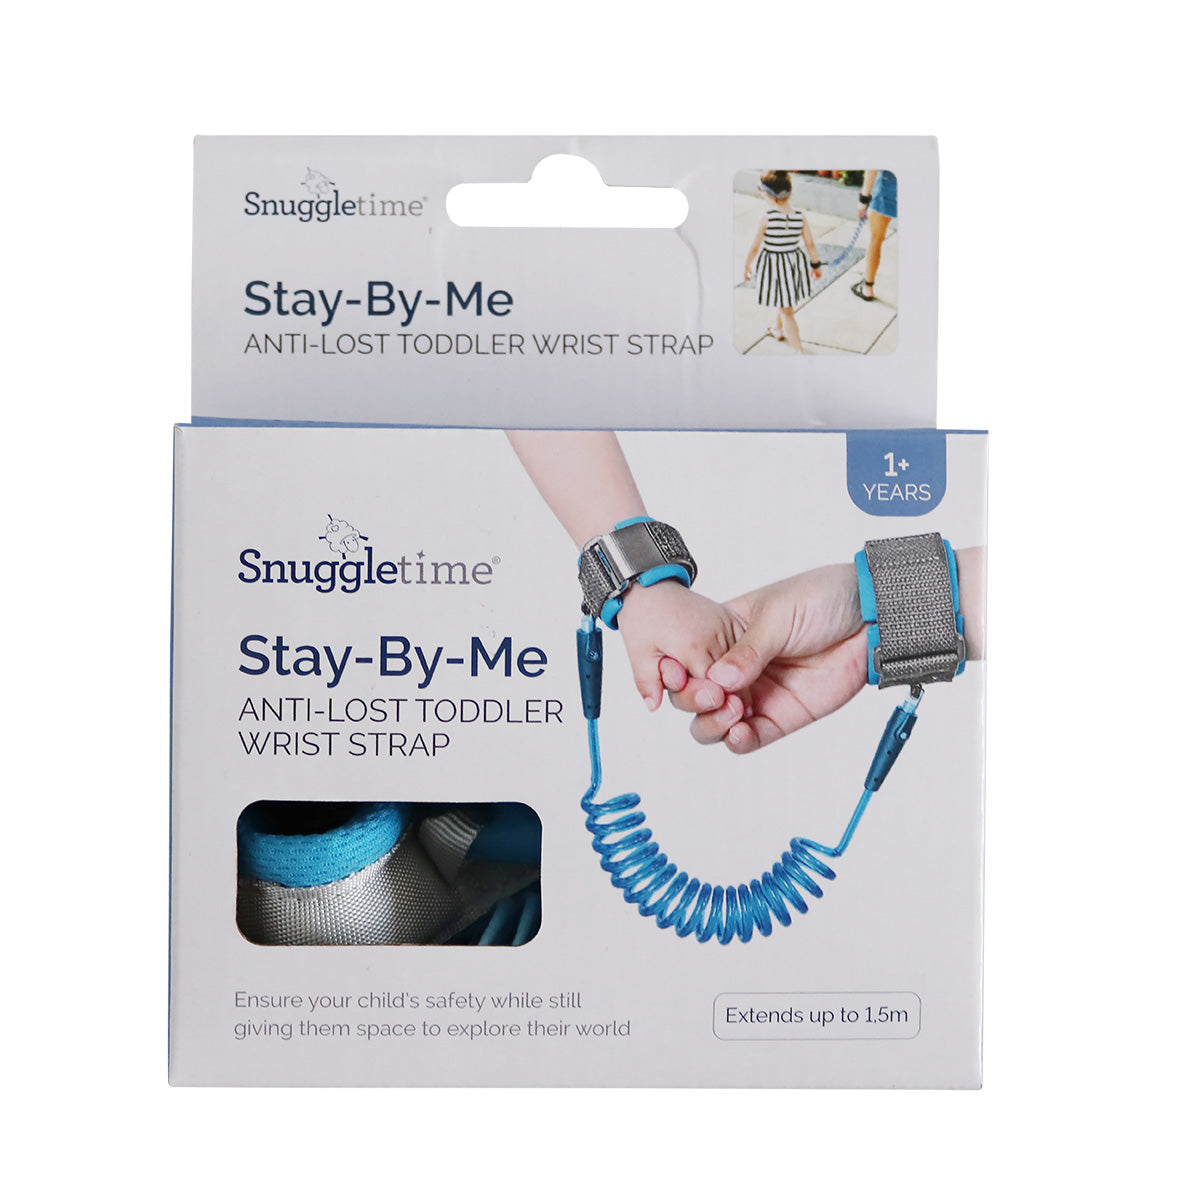 Snuggletime Stay-By-Me Anti-Lost Toddler Wrist Strap